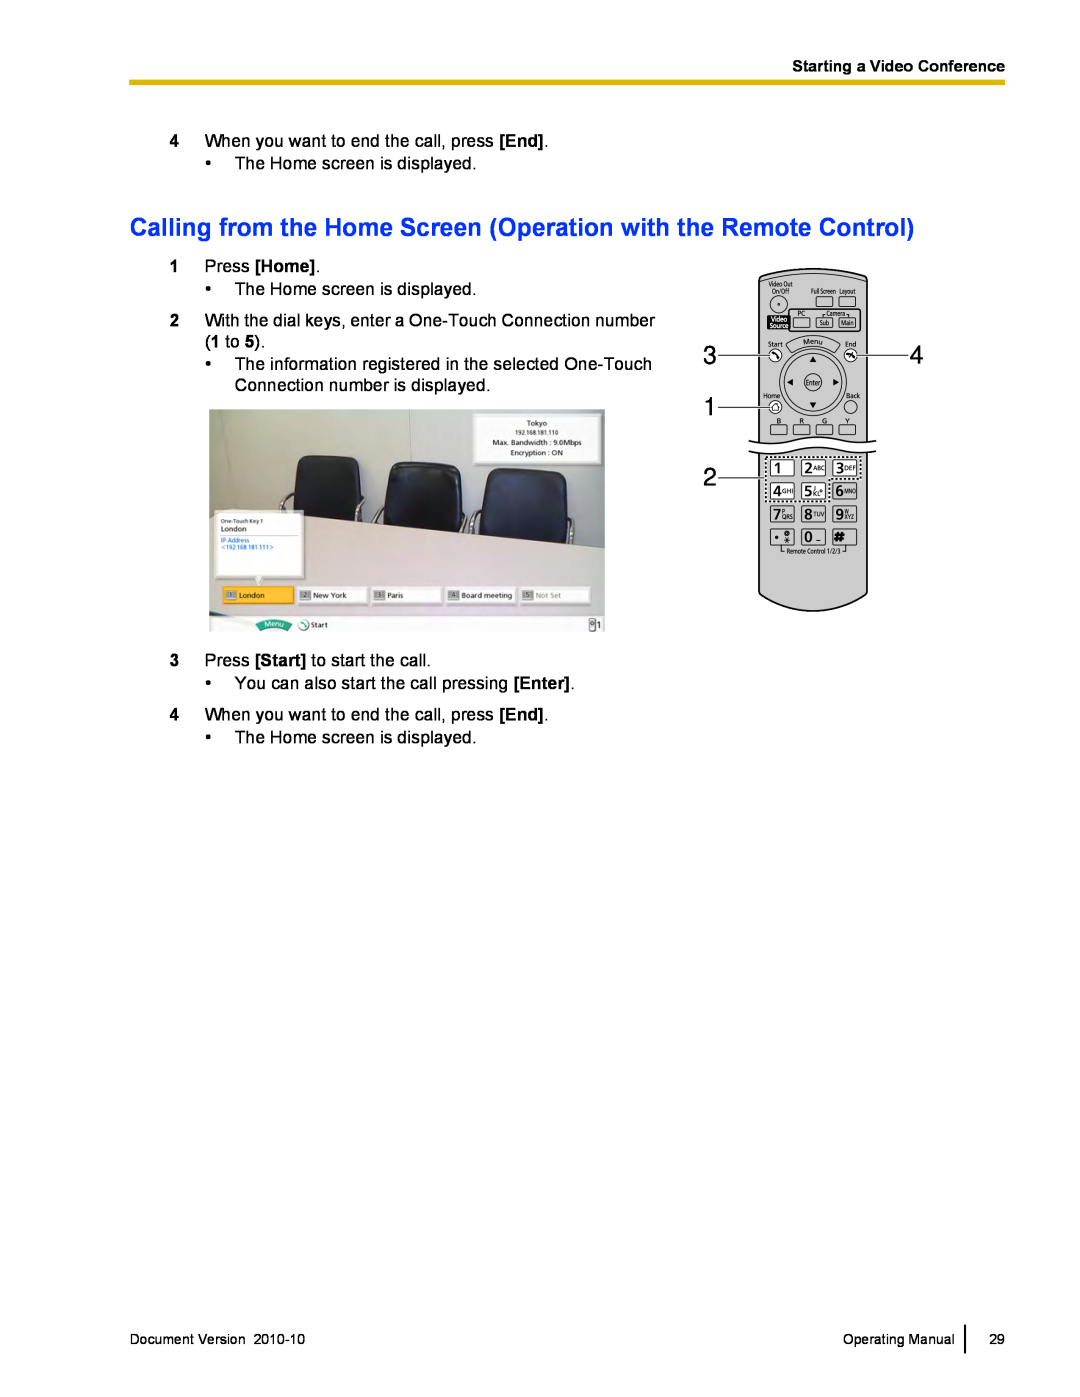 Panasonic KX-VC500 manual 4When you want to end the call, press End 